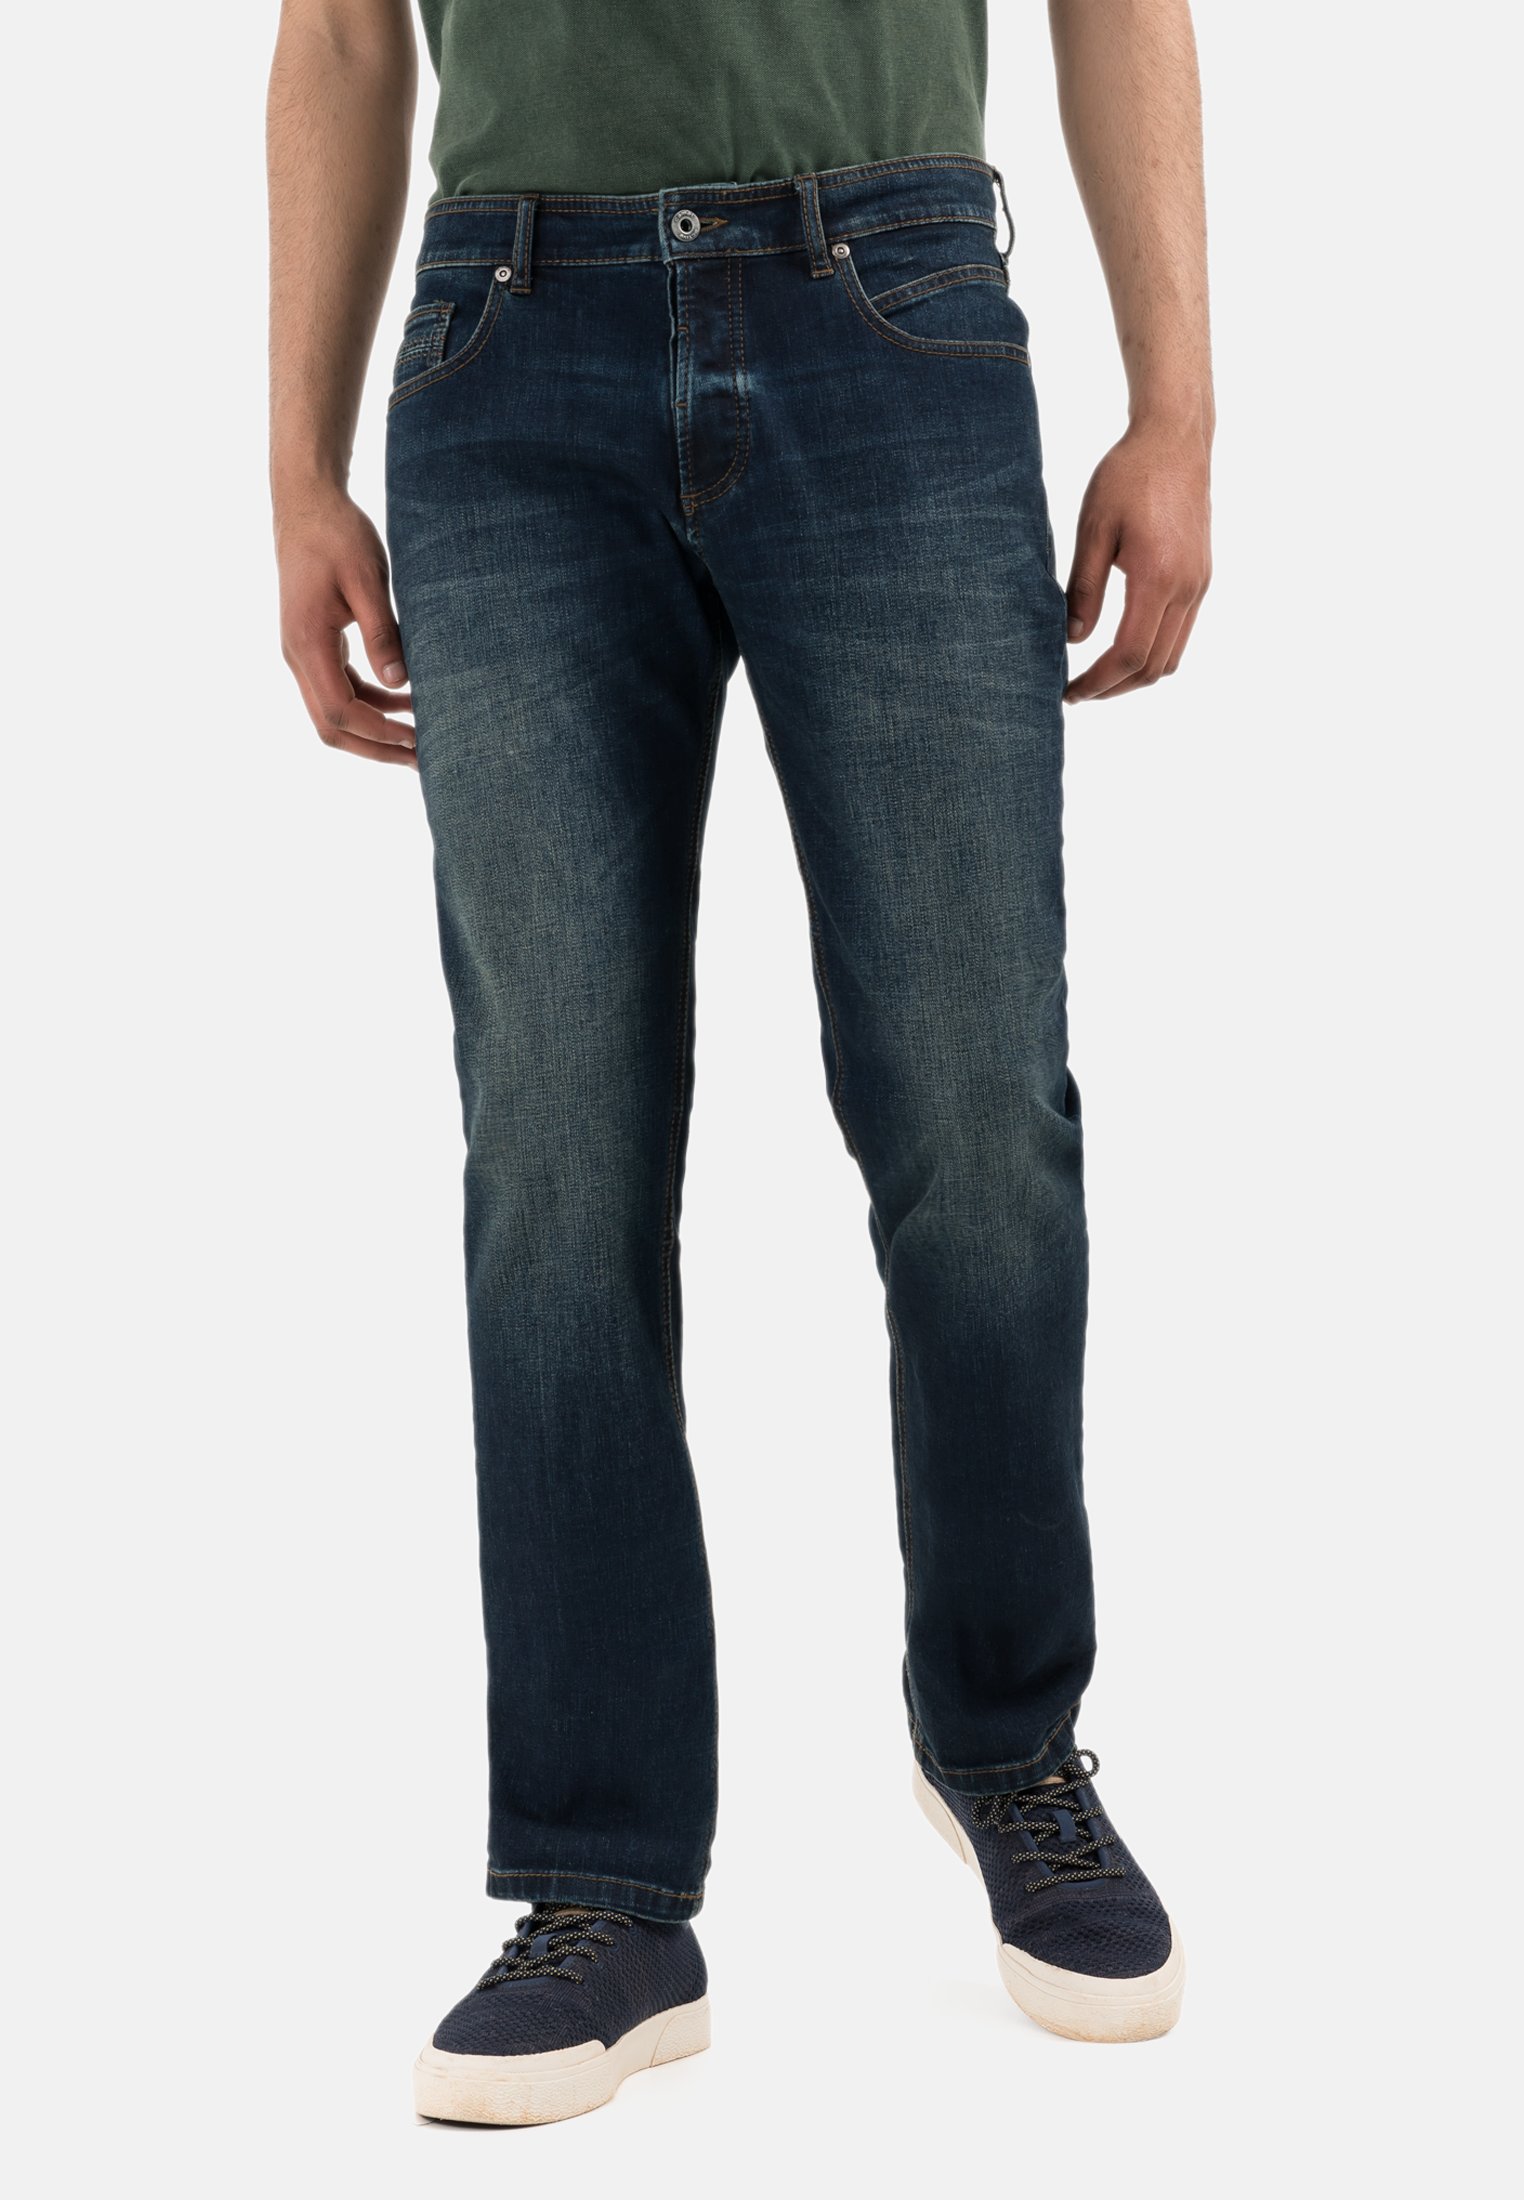 Camel Active Relaxed fit jeans